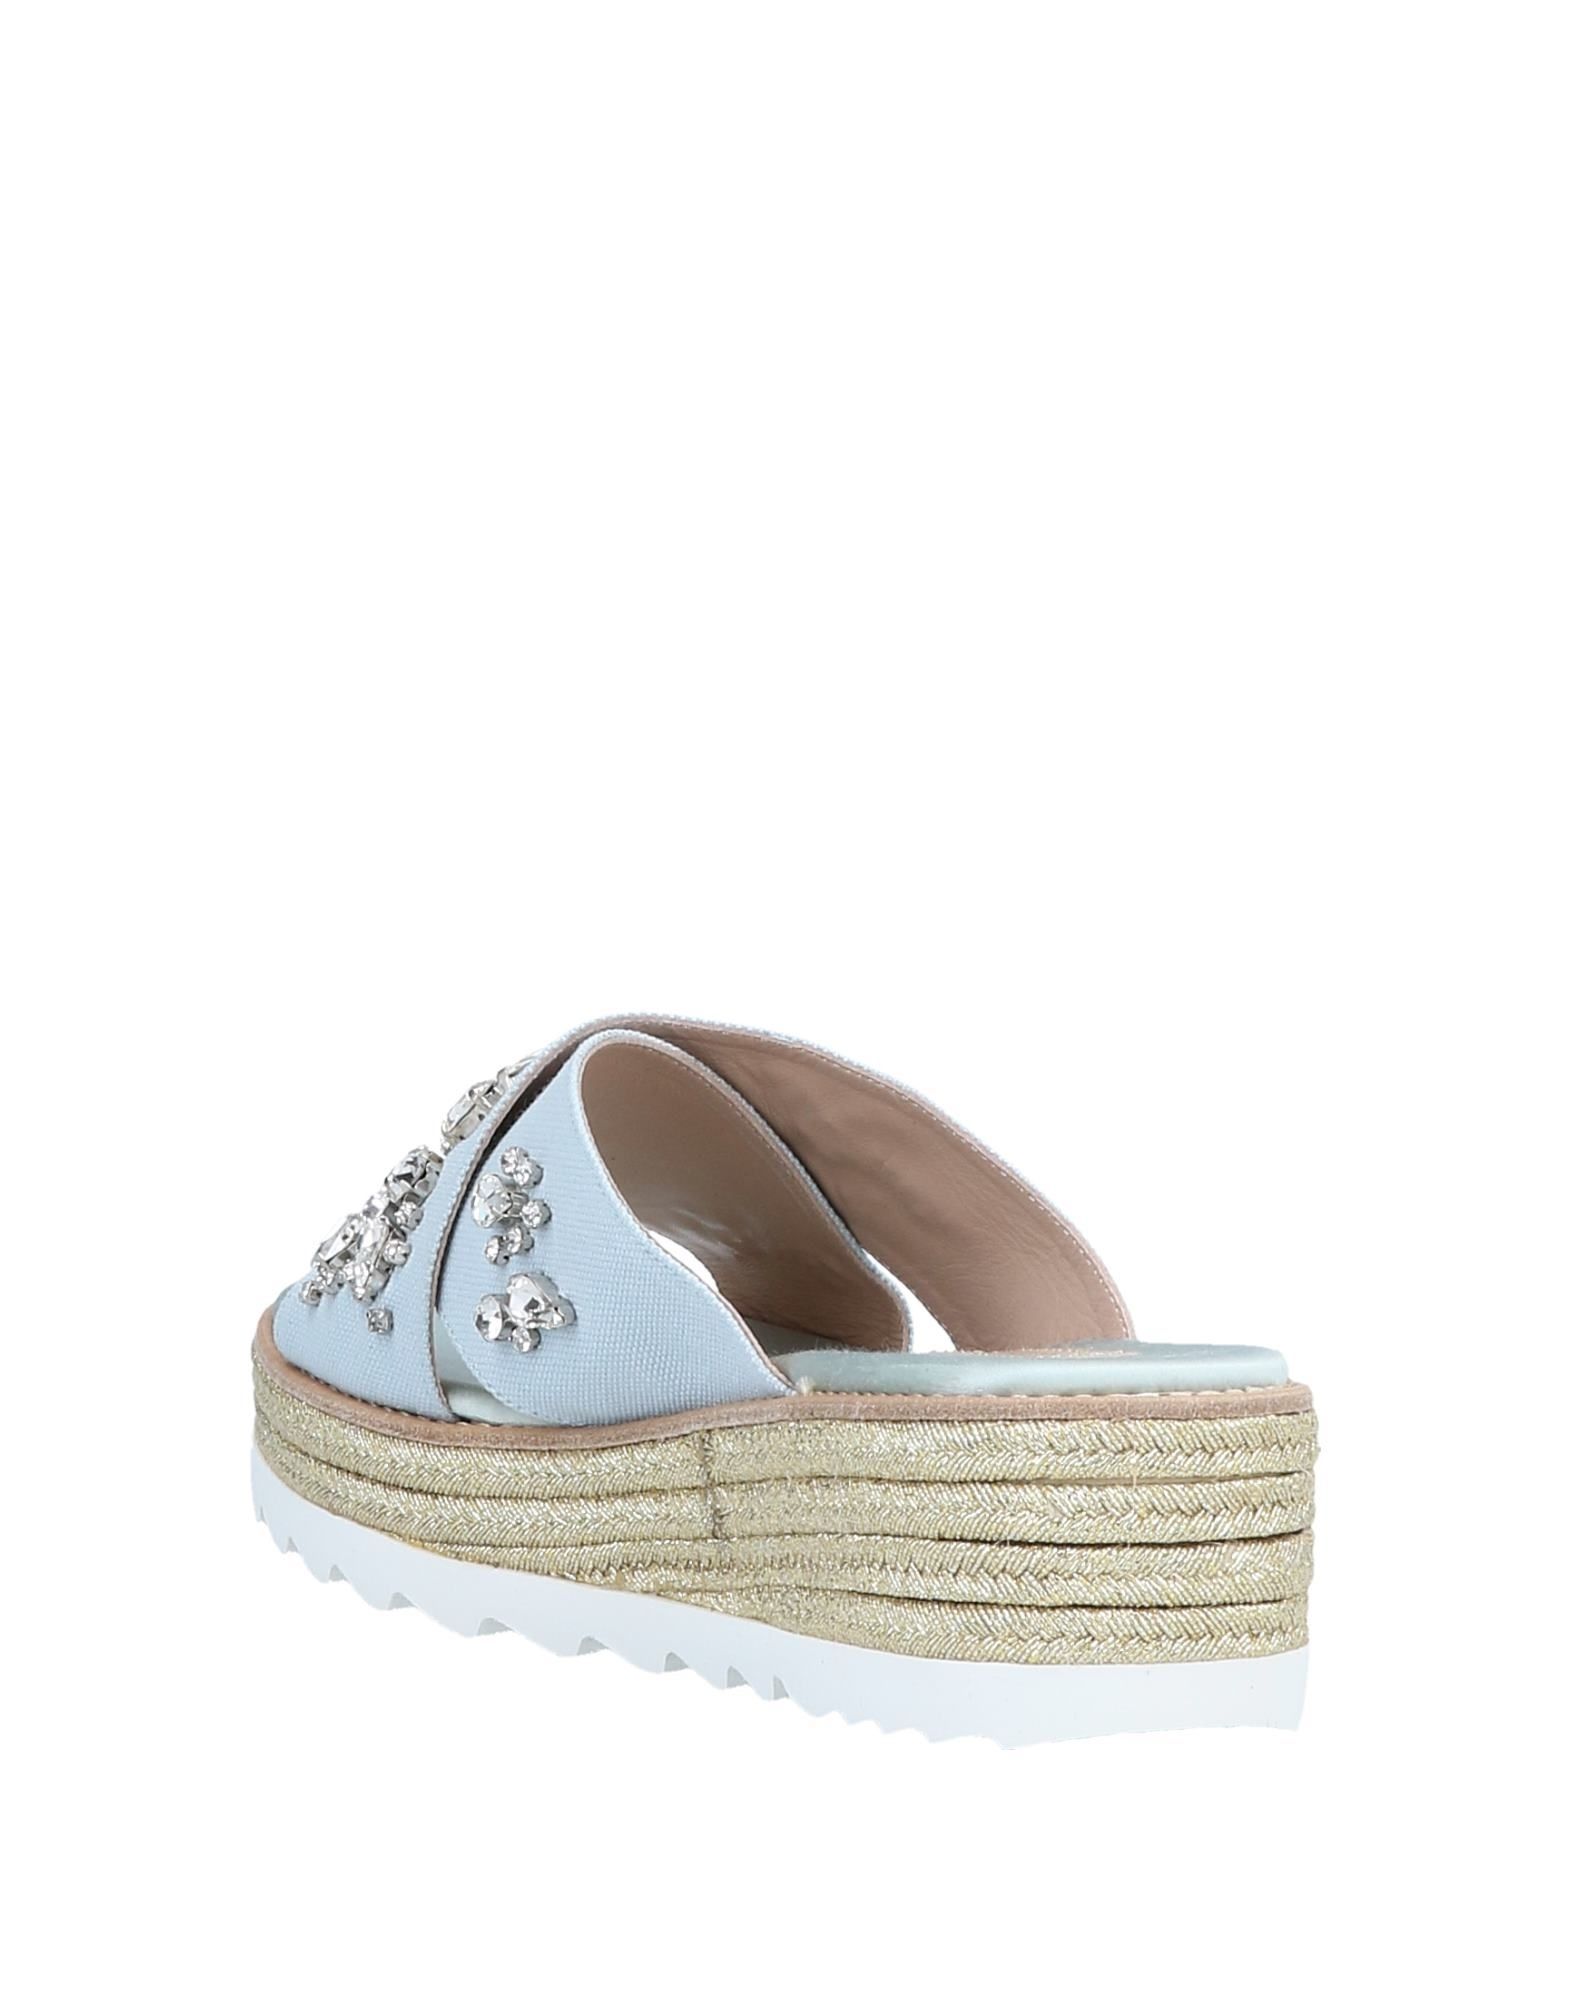 canvas, rhinestones, solid colour, round toeline, wedge heel, rope wedge, leather lining, rubber sole, contains non-textile parts of animal origin